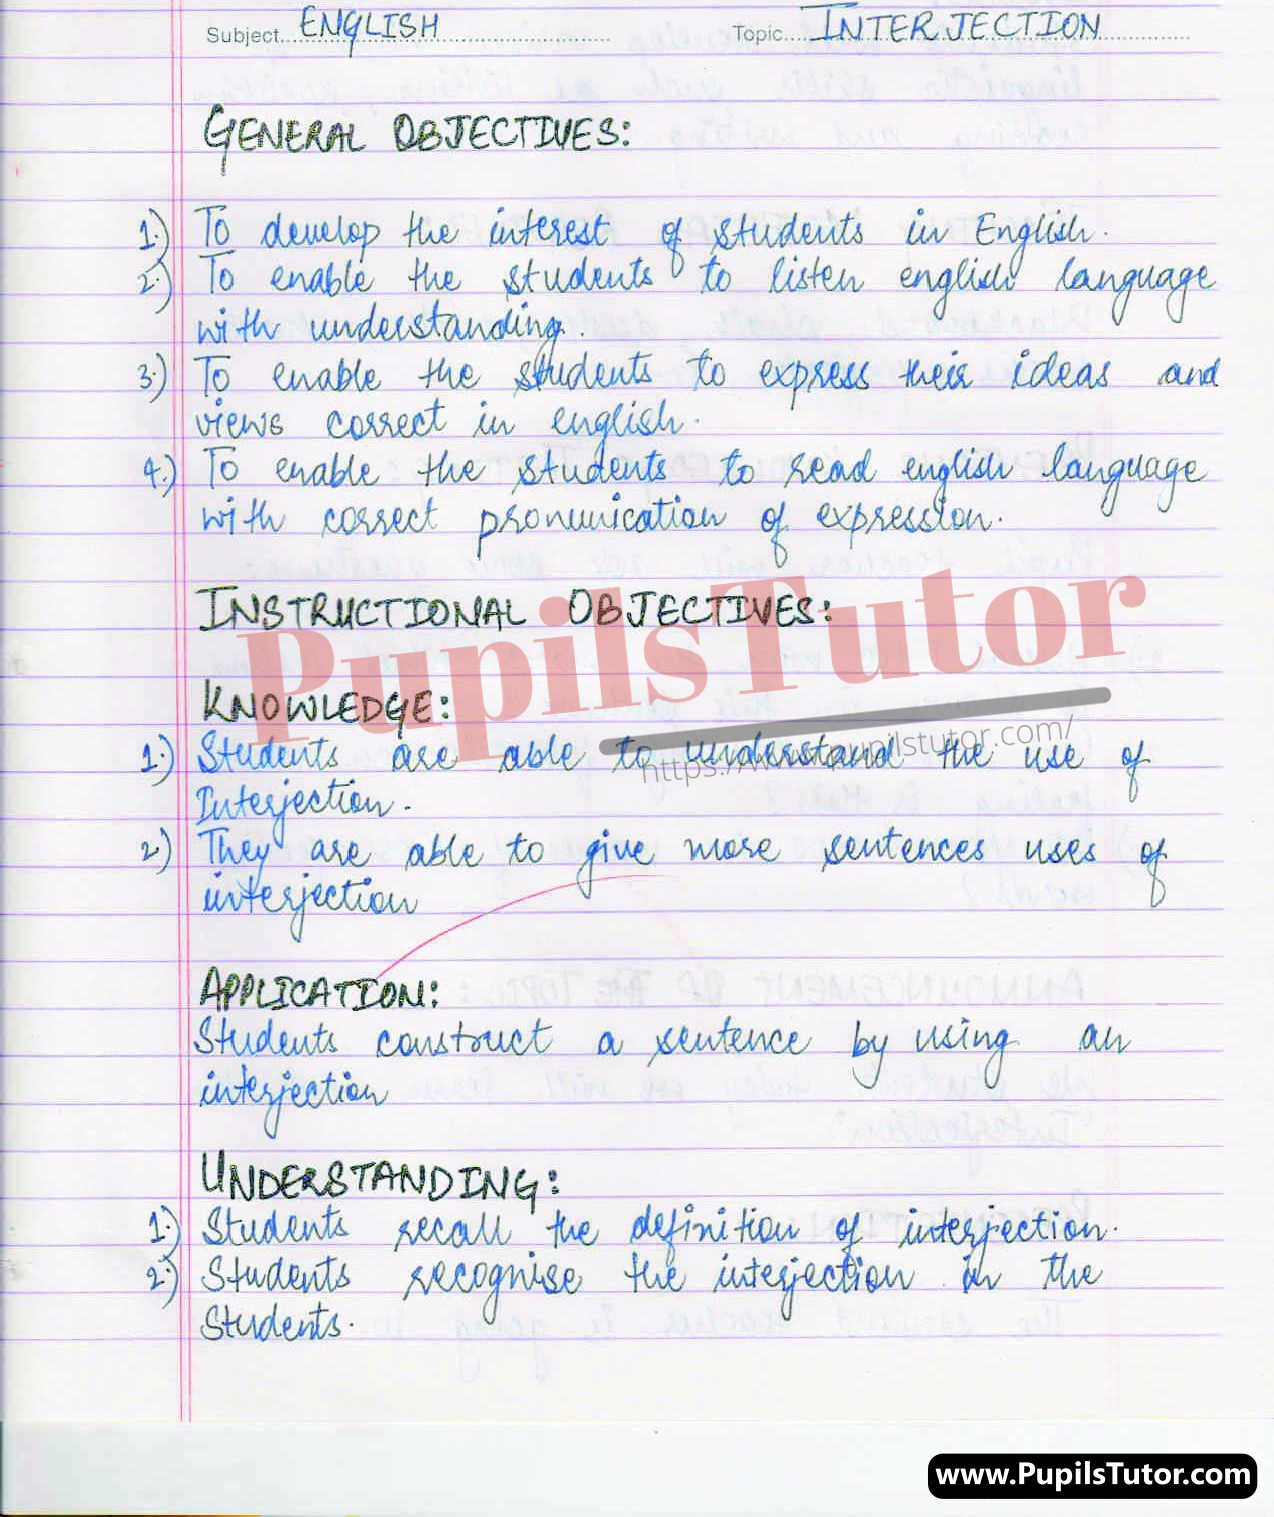 English Grammar Lesson Plan For Class 12 On Interjection And Its Usage – (Page And Image Number 1) – Pupils Tutor